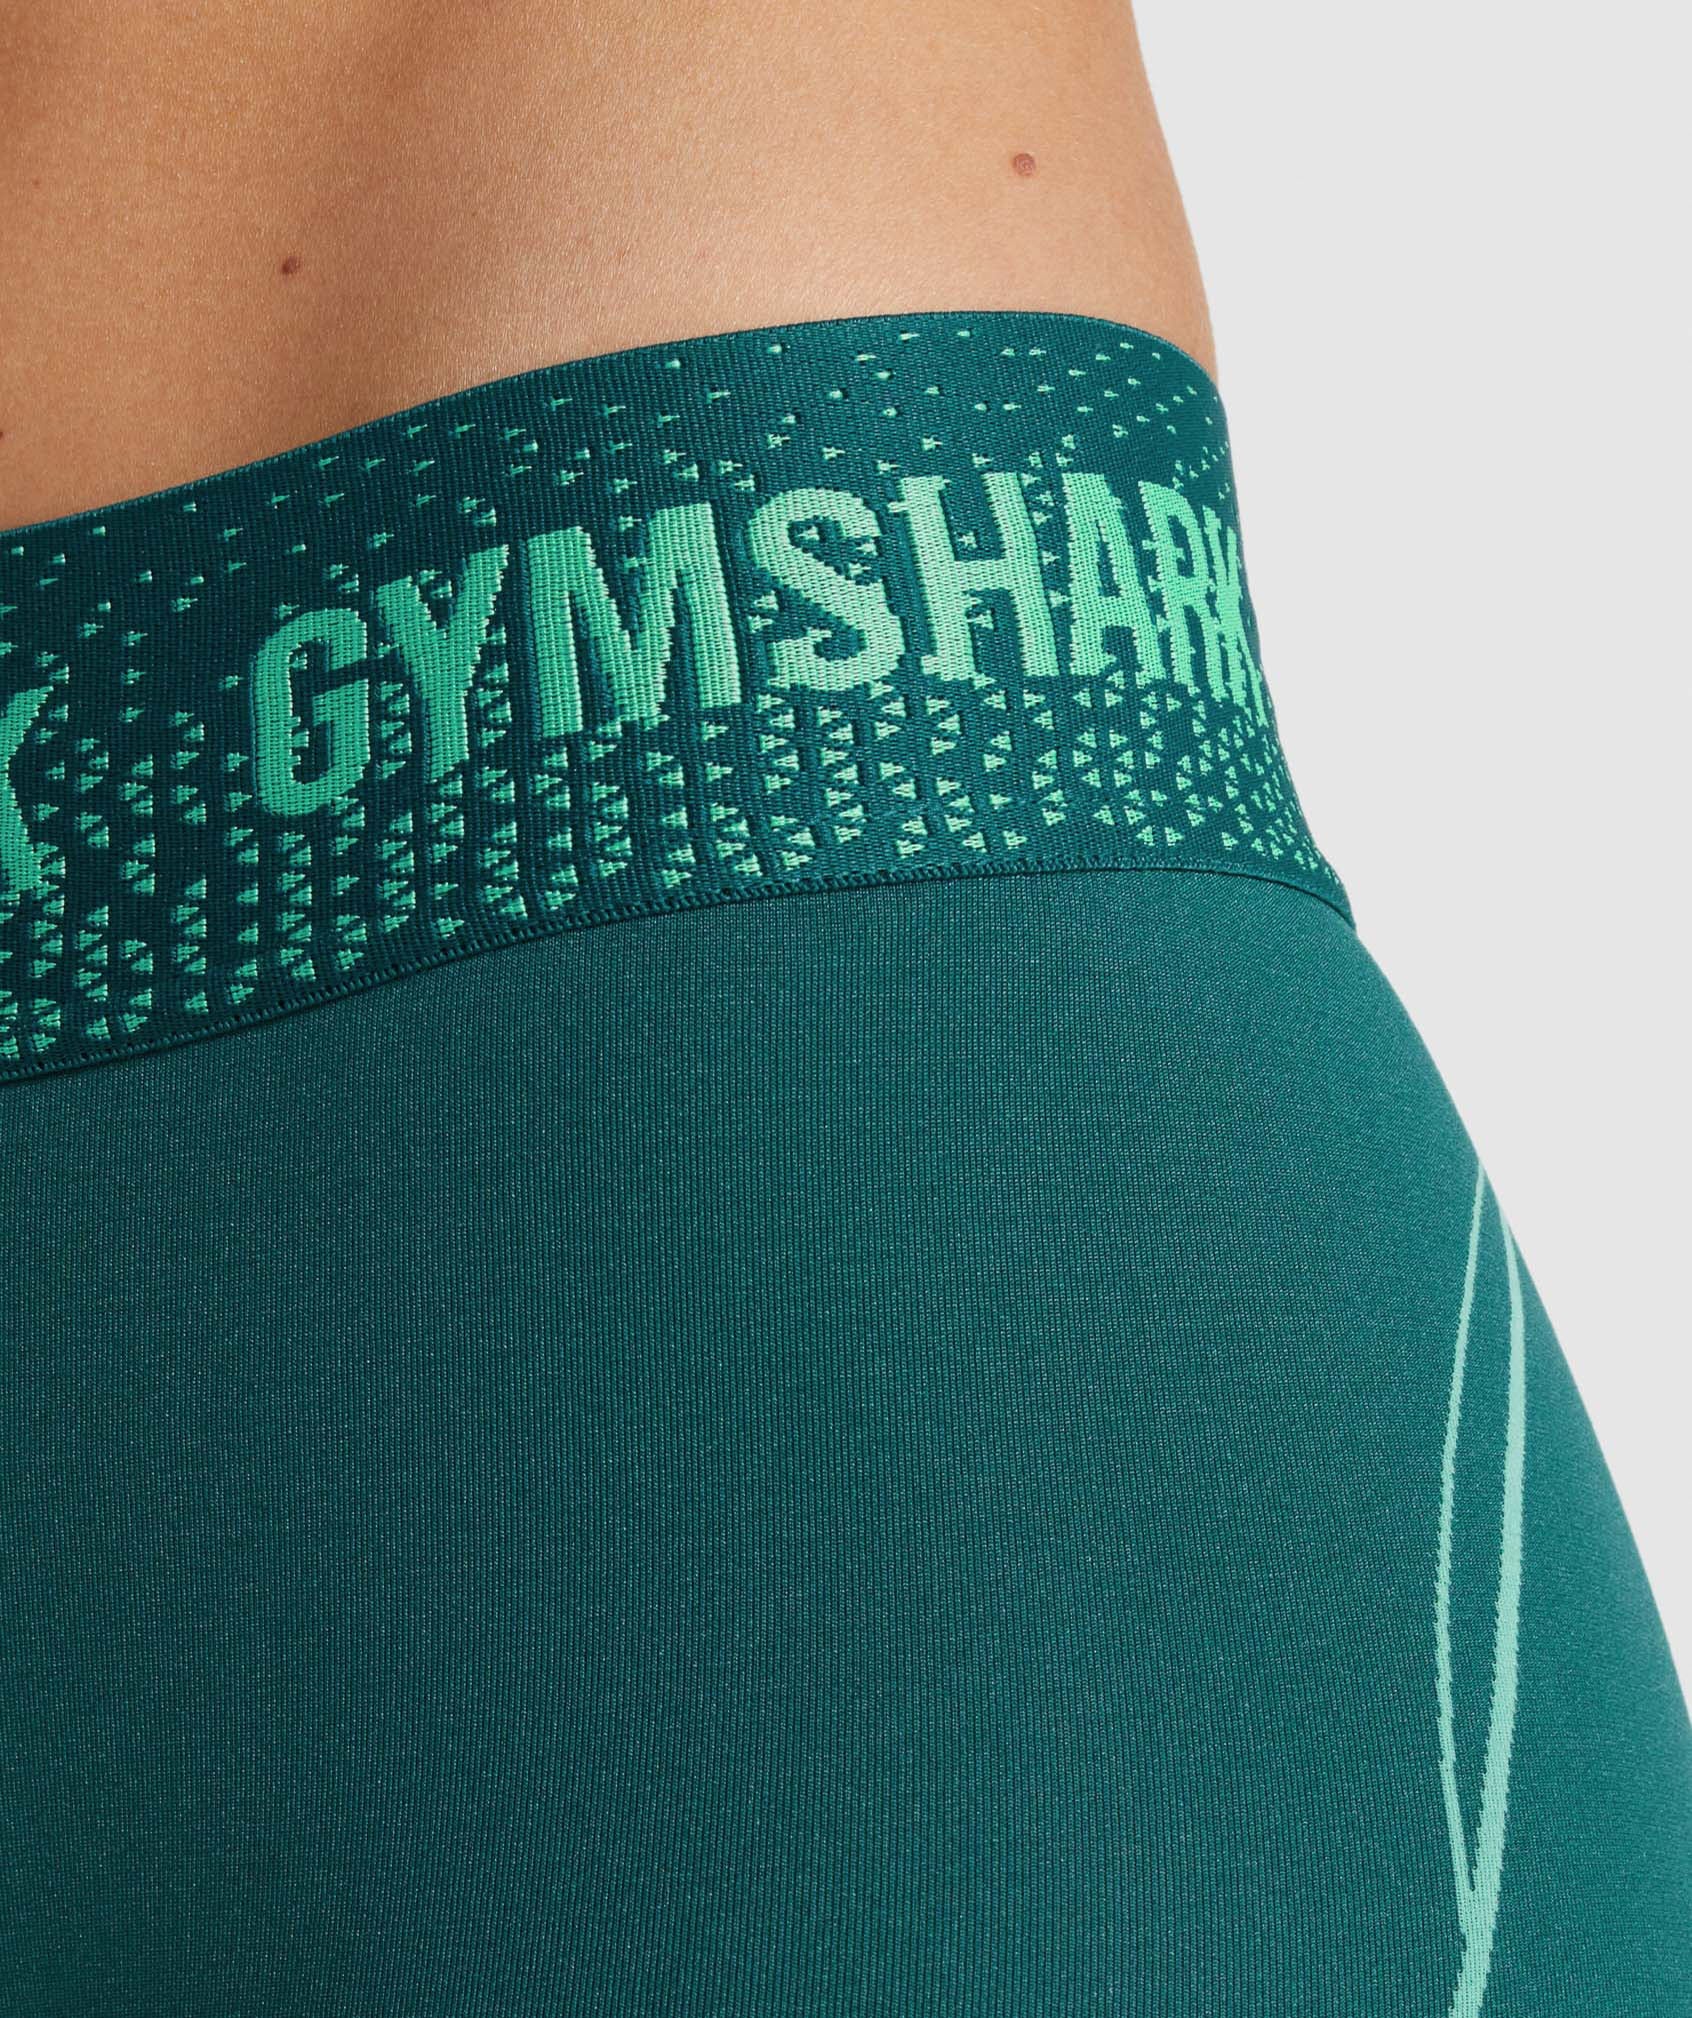 Apex Seamless Low Rise Shorts in Teal